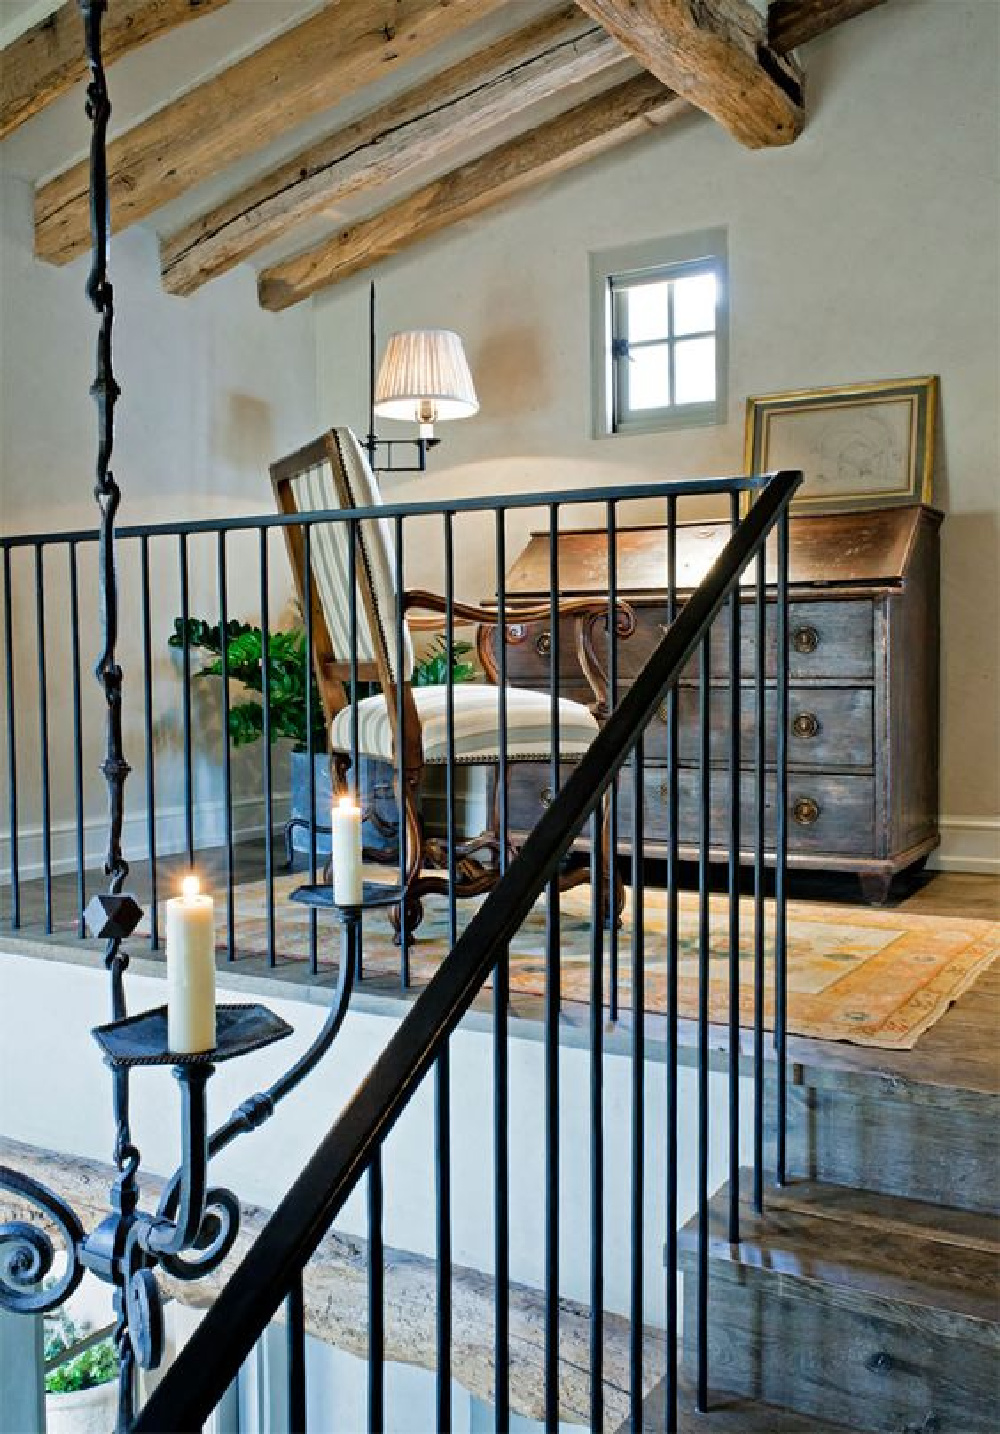 Is it a stairway to heaven? This lofty space with rustic elegance and country charm is a but one moment in this story brimming with interior design inspiration for admirers of European inspired country decor. #loft #rusticdecor